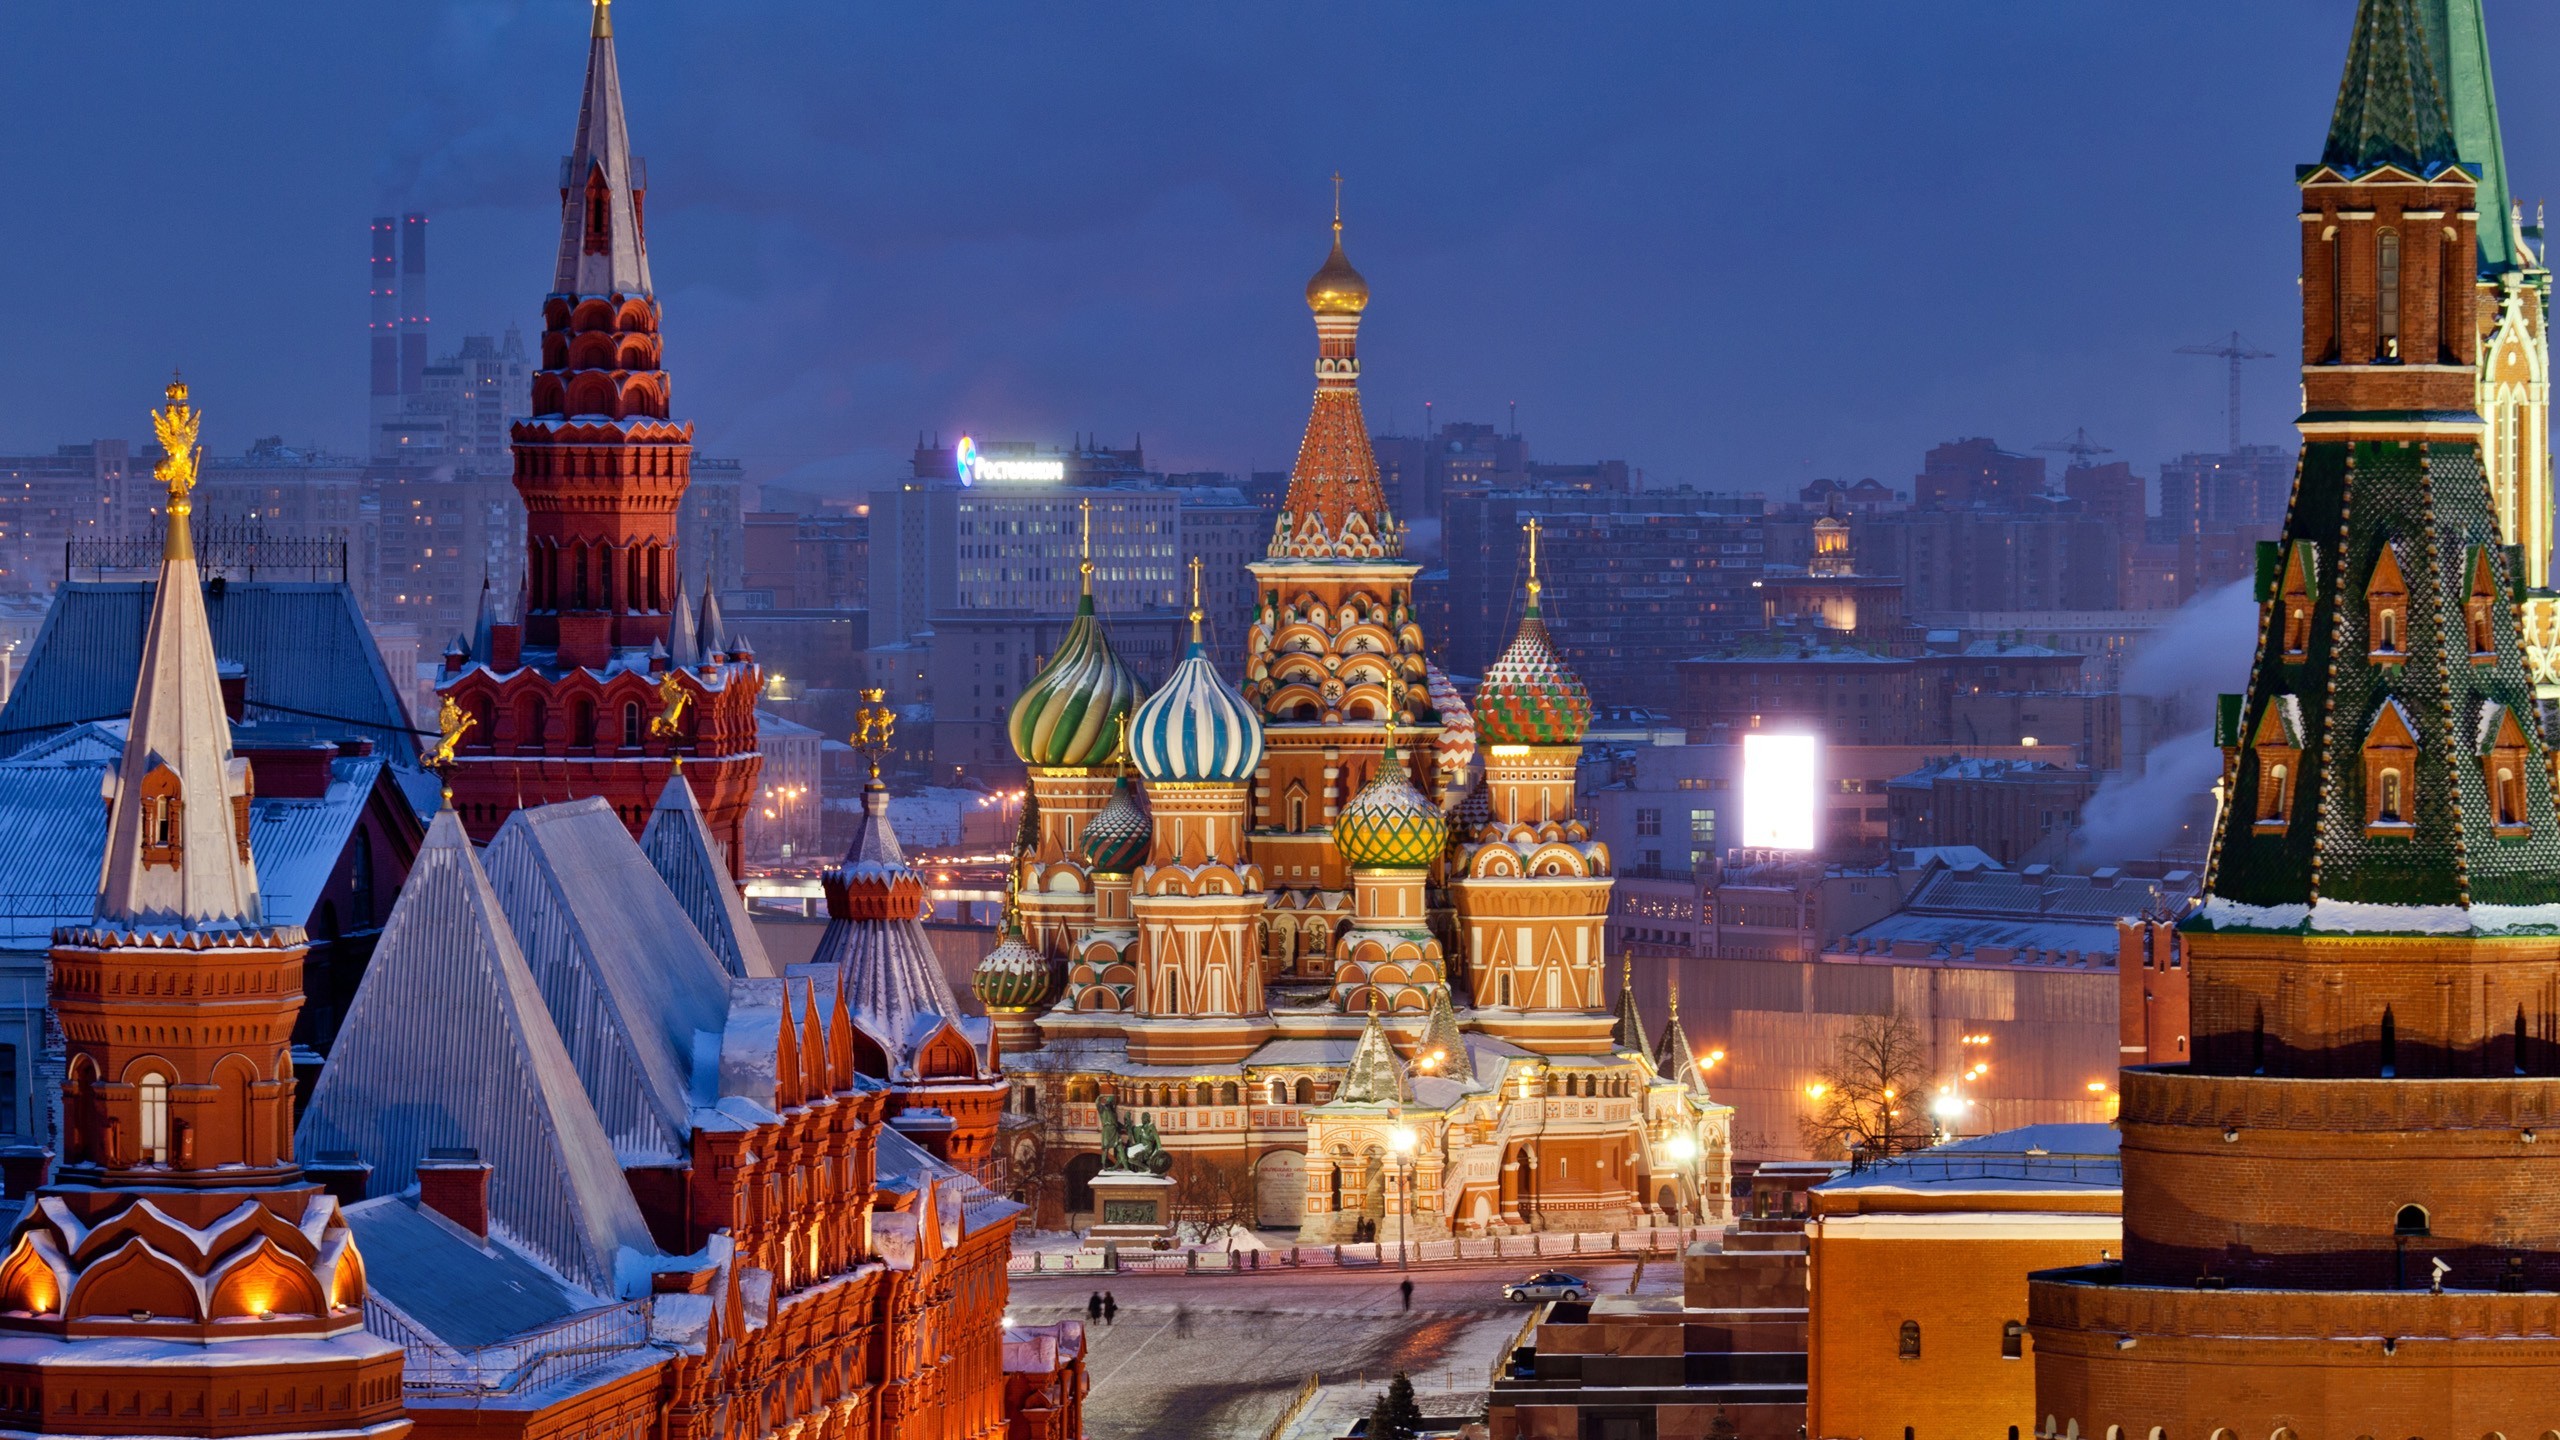 General 2560x1440 Moscow Russia Europe church Kremlin city cityscape architecture aerial view building rooftops capital snow winter evening cathedral Red Square lights street Saint Basil's Cathedral landmark